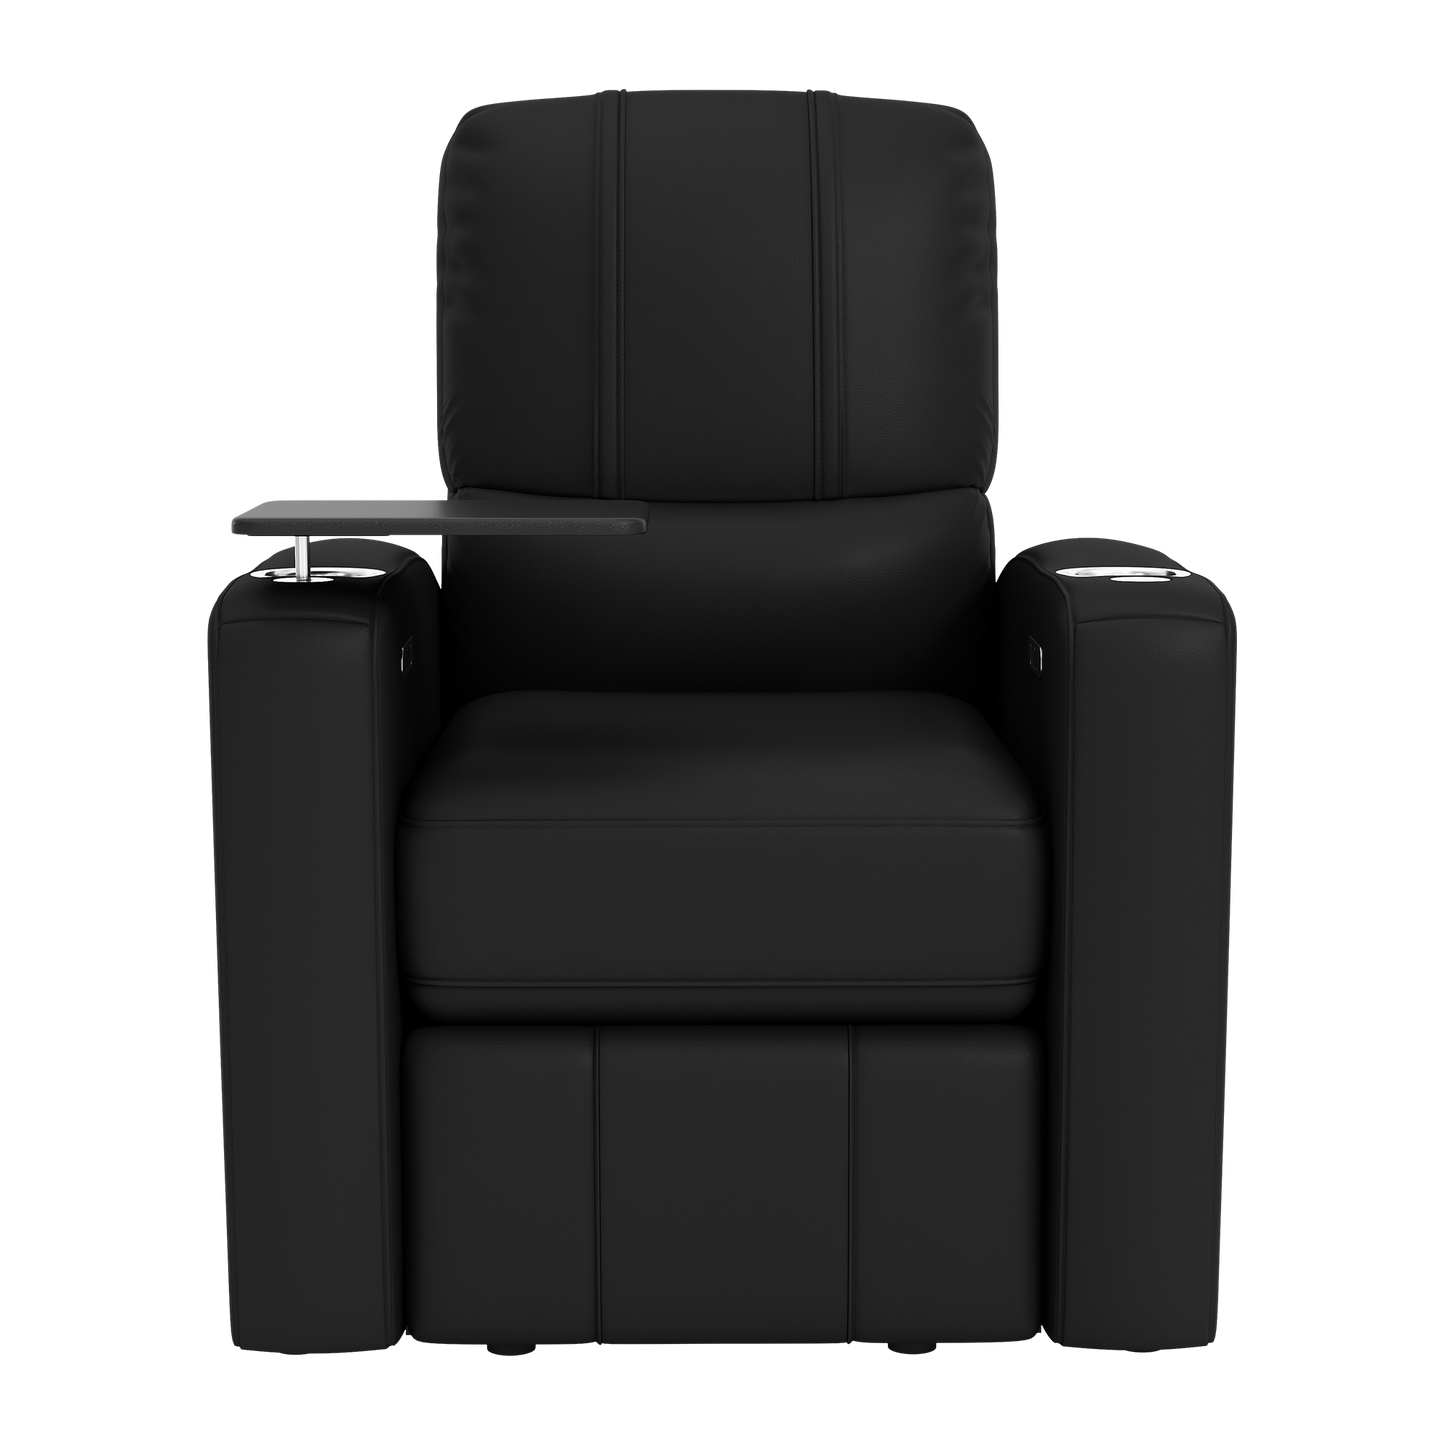 Stealth Power Plus Recliner with Kansas City Royals Primay